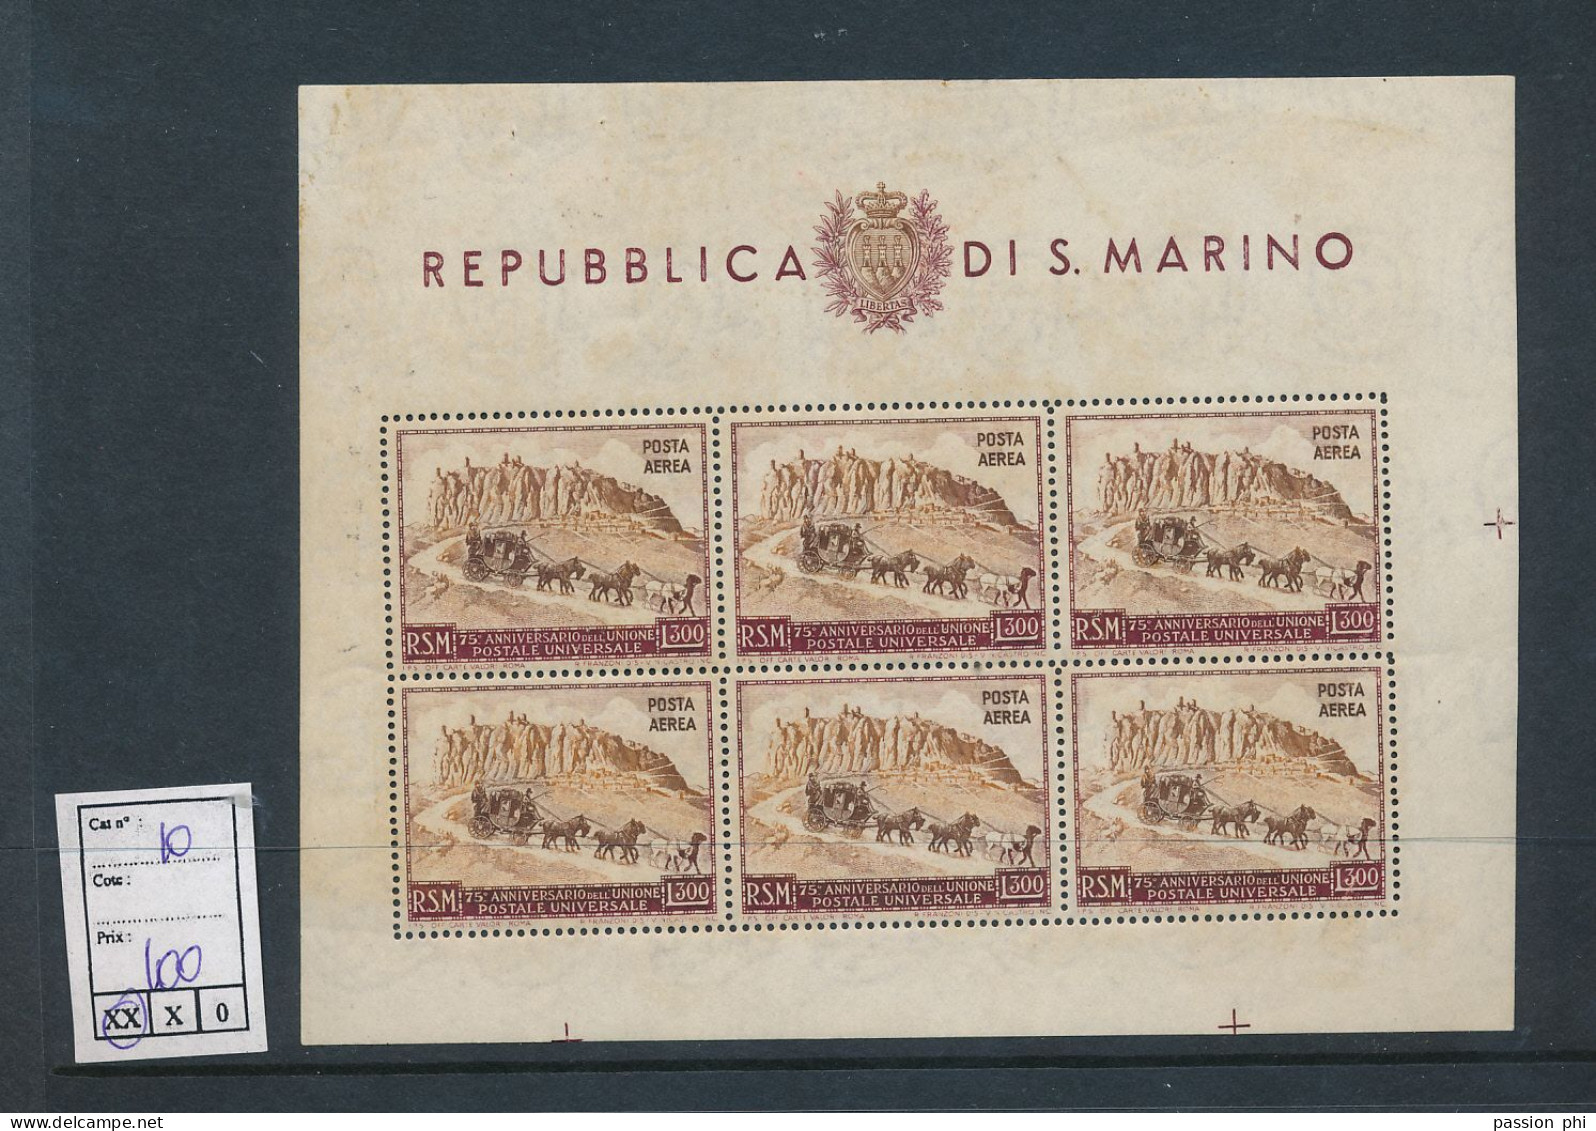 ST. MARINO SASSONE 10 MNH A LACK OF GUM AT THE TOP NORMAL FOR THIS BLOCK TWO PIN HOLES ON THE TOP - Blocks & Kleinbögen